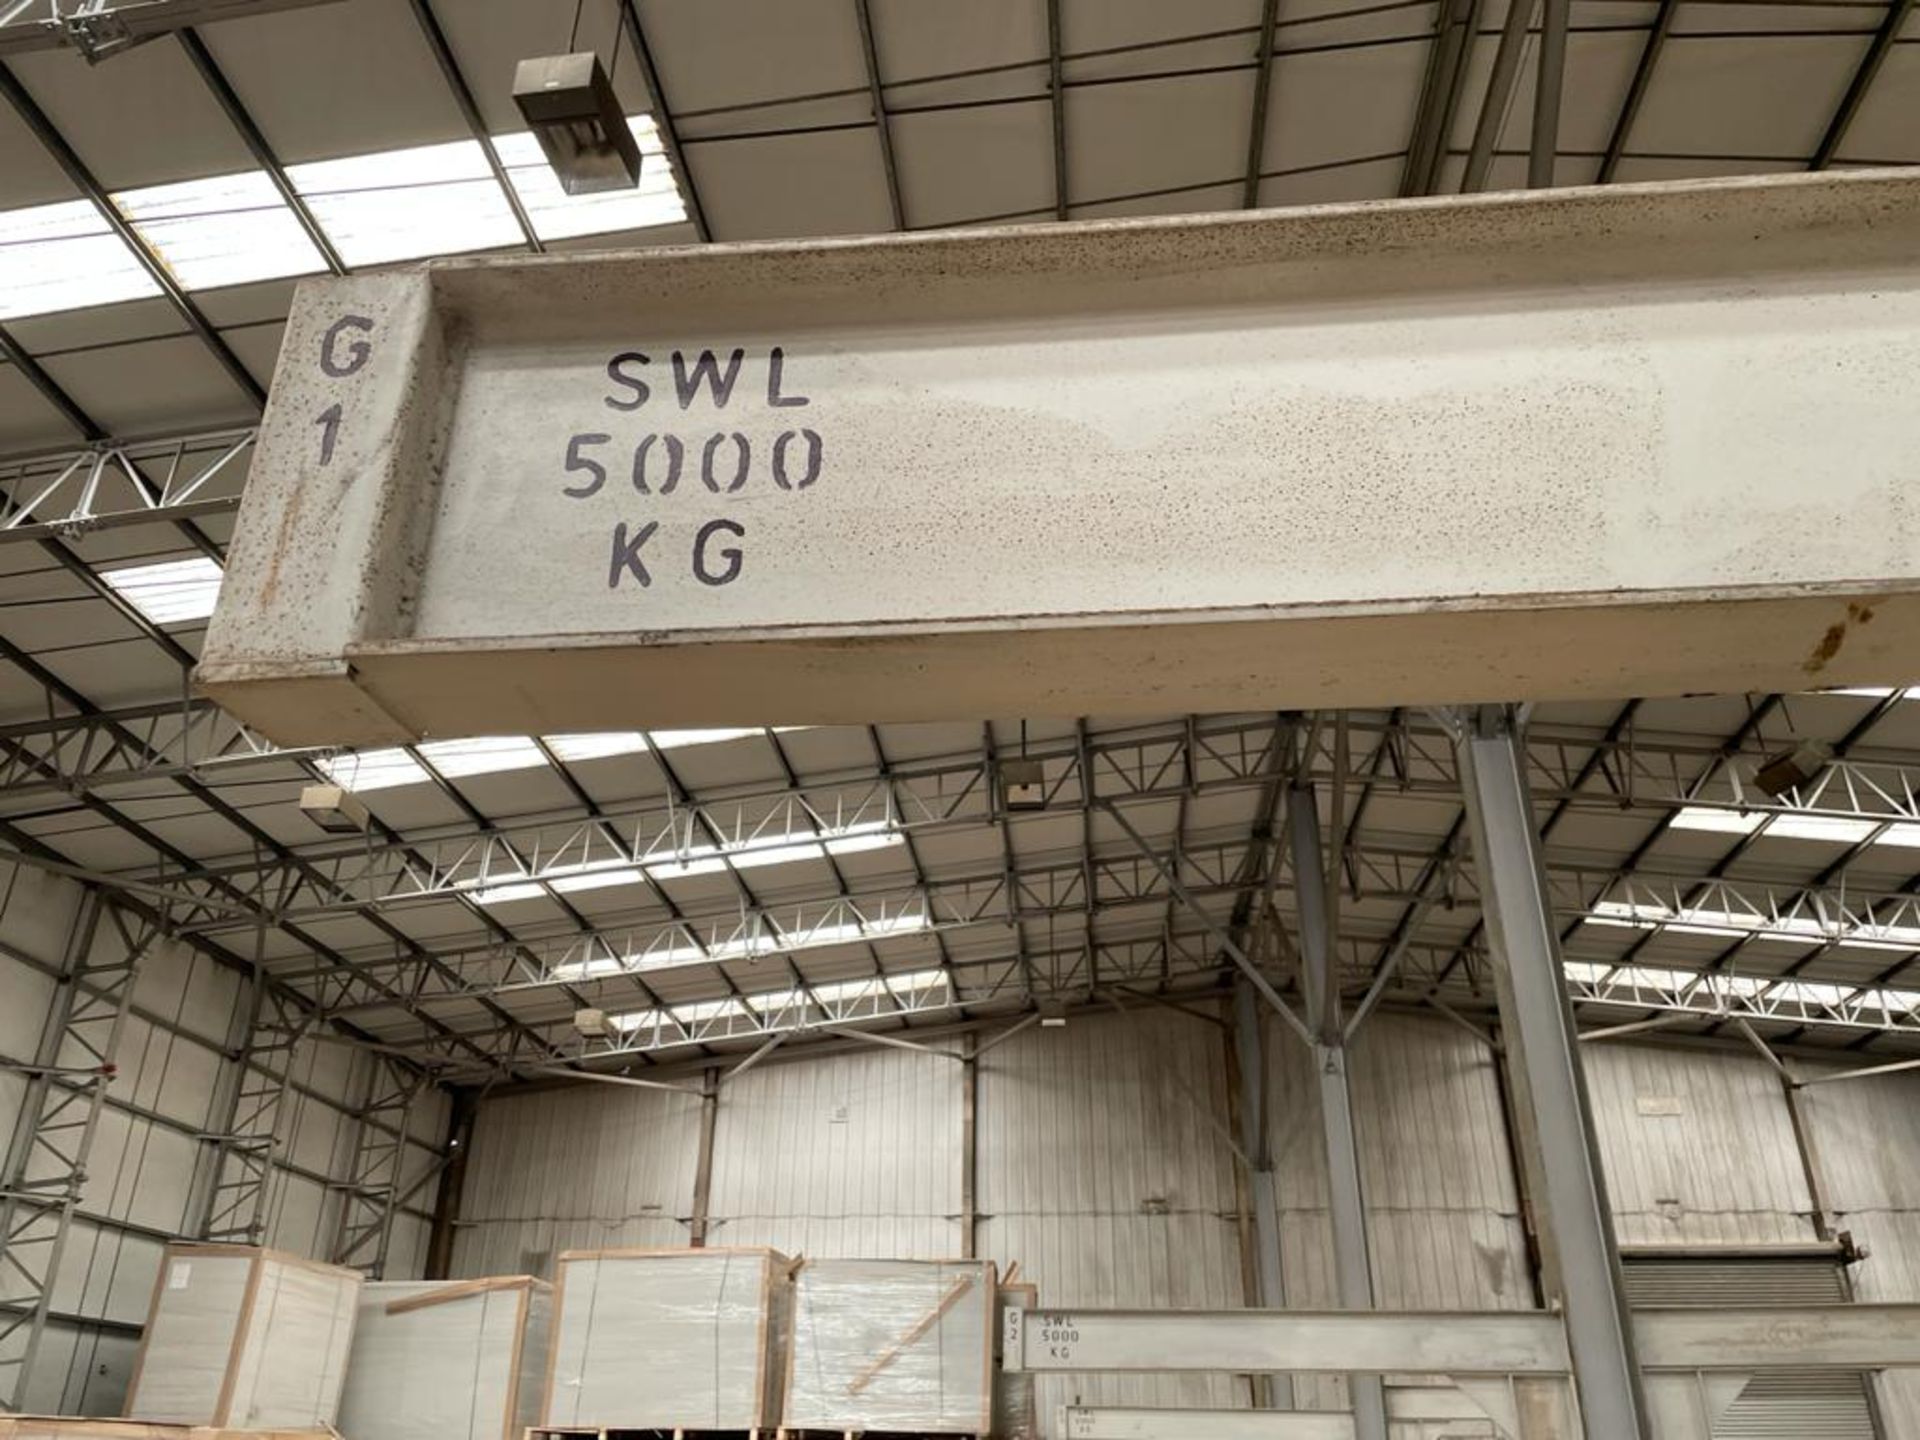 6 x Heavy Duty Cantilever Racking Uprights - SWL 5000kg - Ideal For Builders Merchants or Warehouses - Image 2 of 8